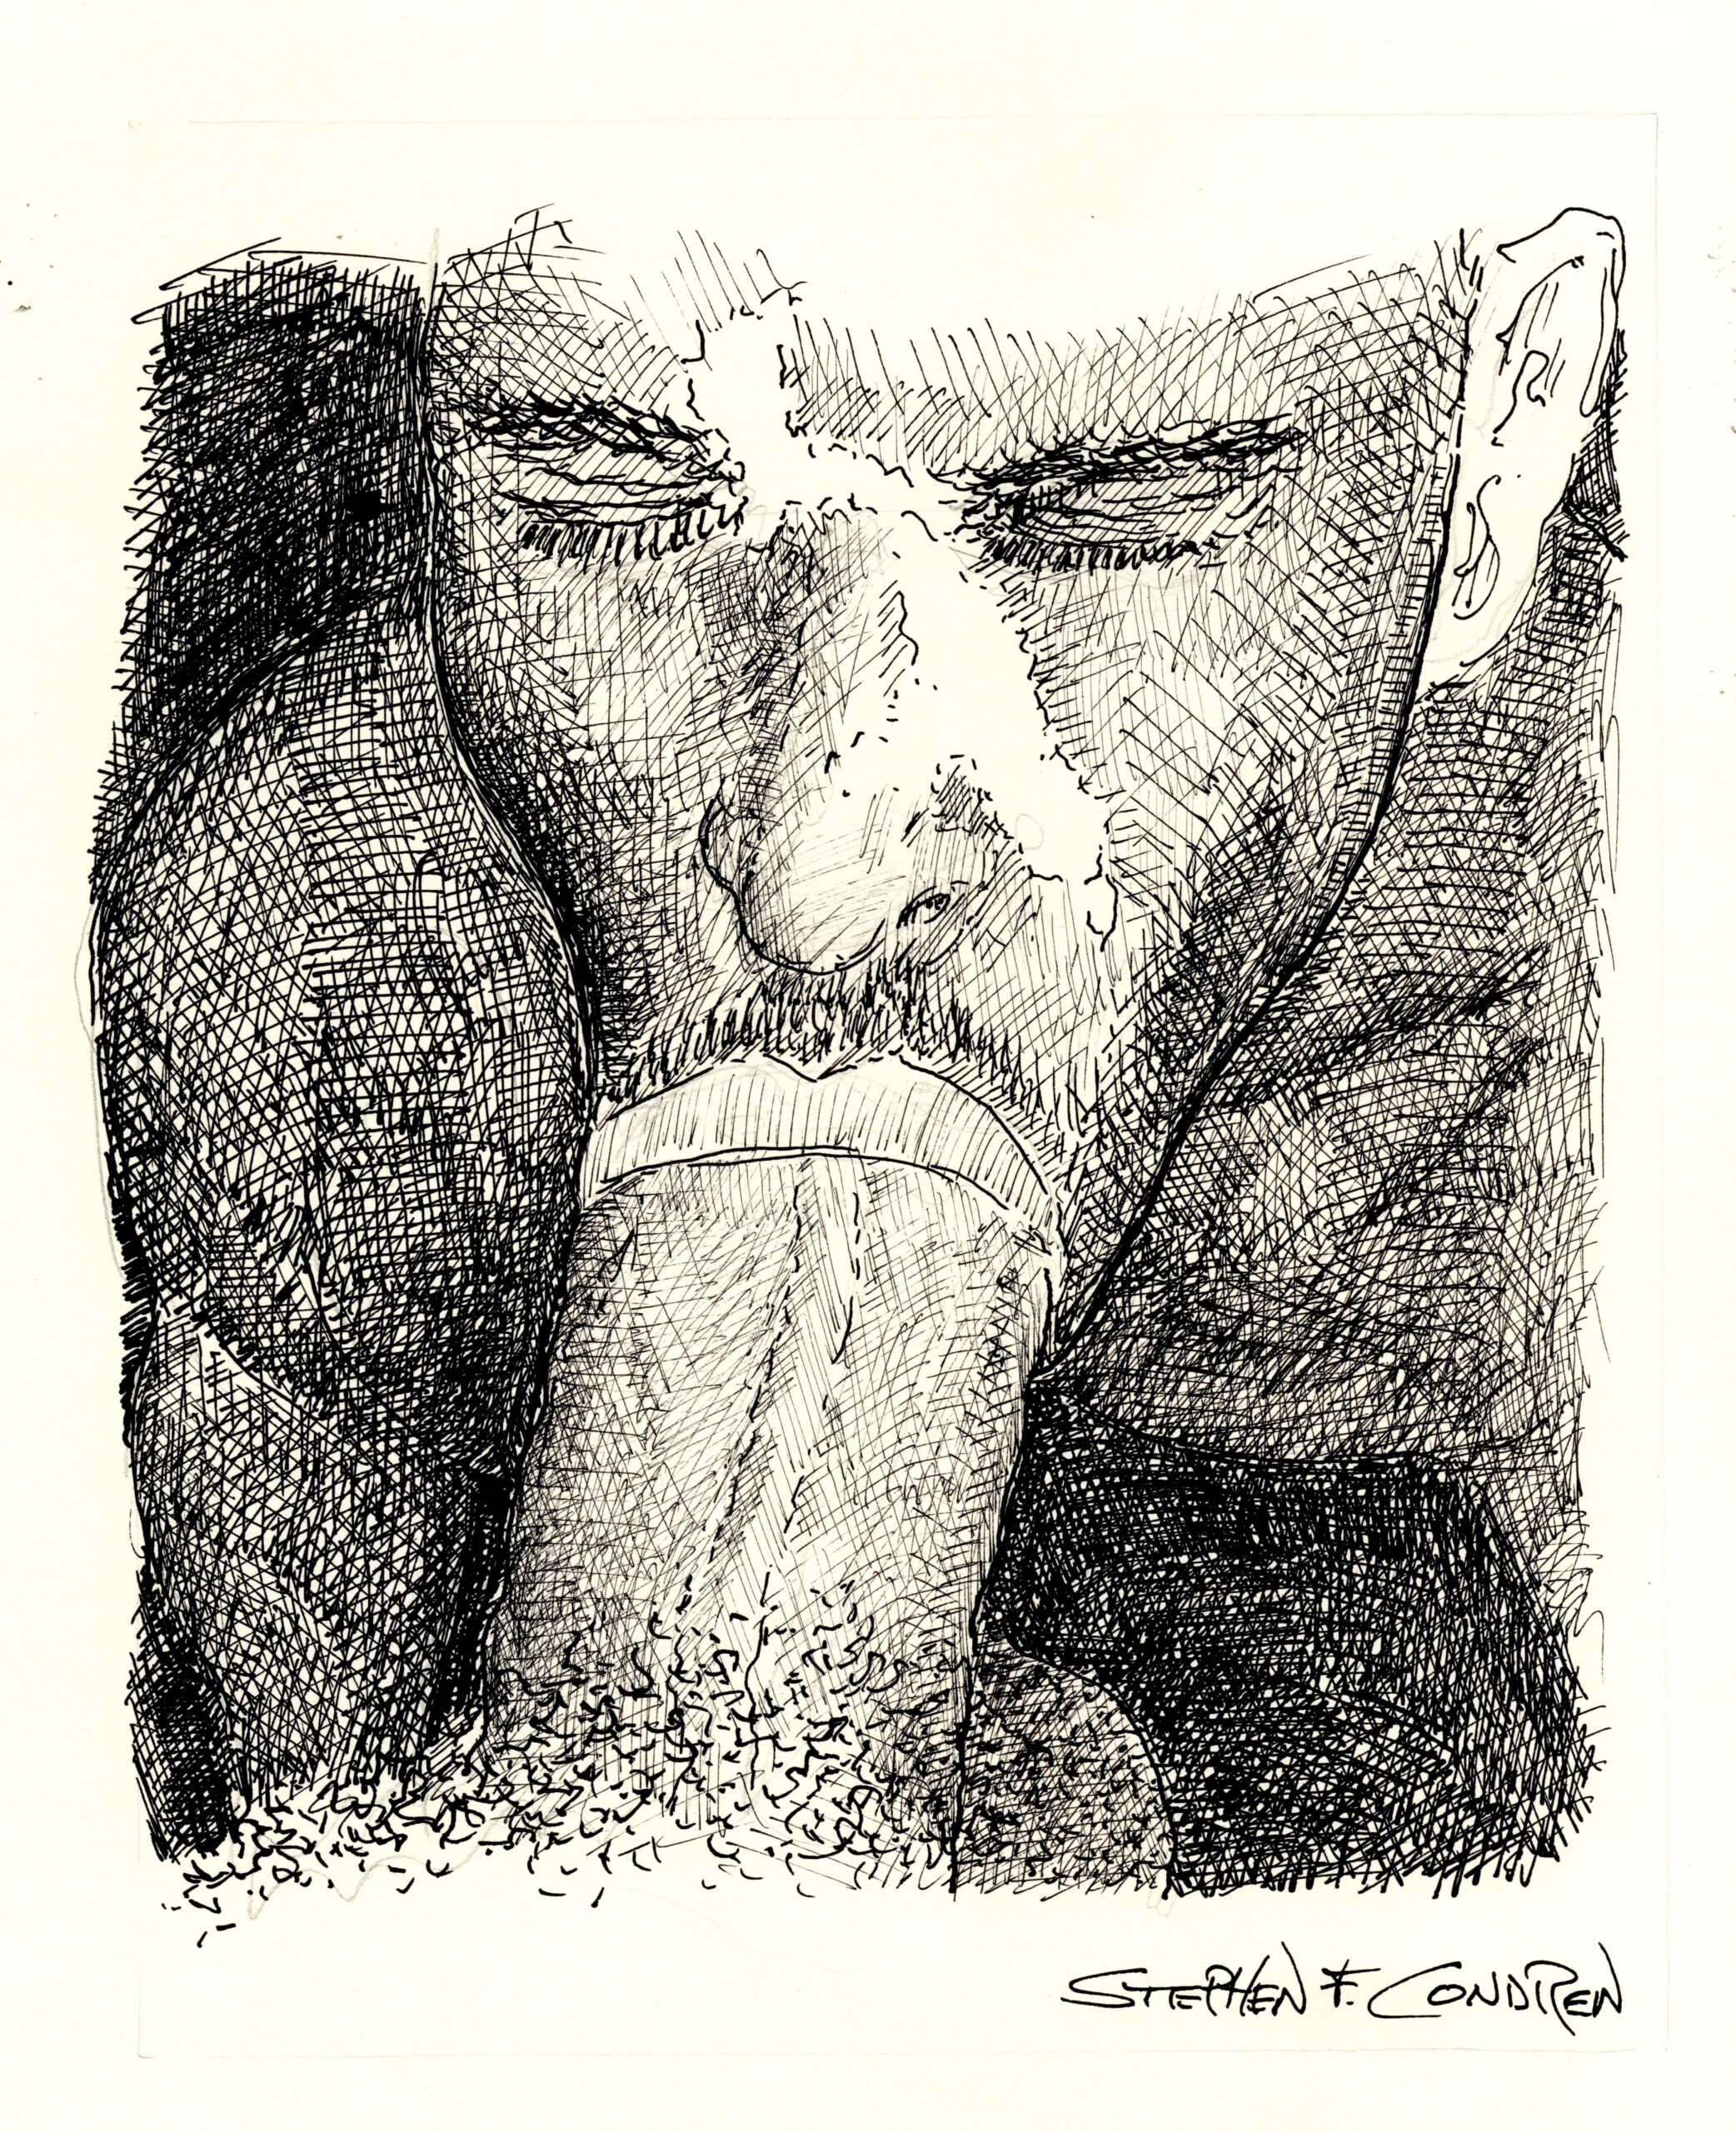 Pen & ink drawing of a gay boy sucking a big dick. He has a hard body with a muscular physique and firm pecs.